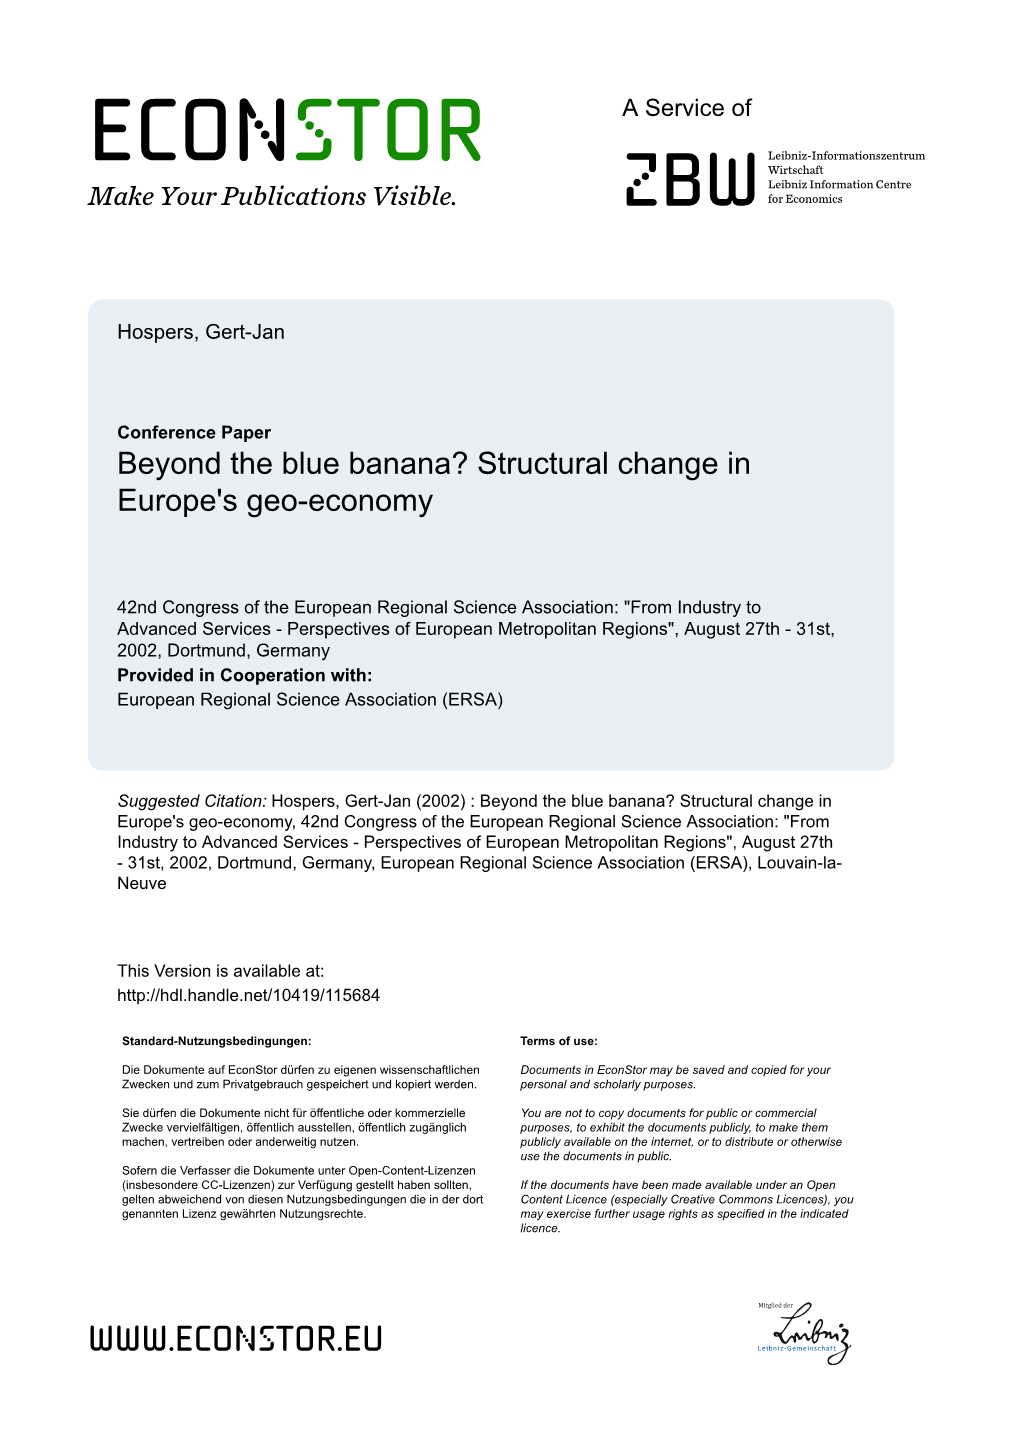 Beyond the Blue Banana? Structural Change in Europe's Geo-Economy